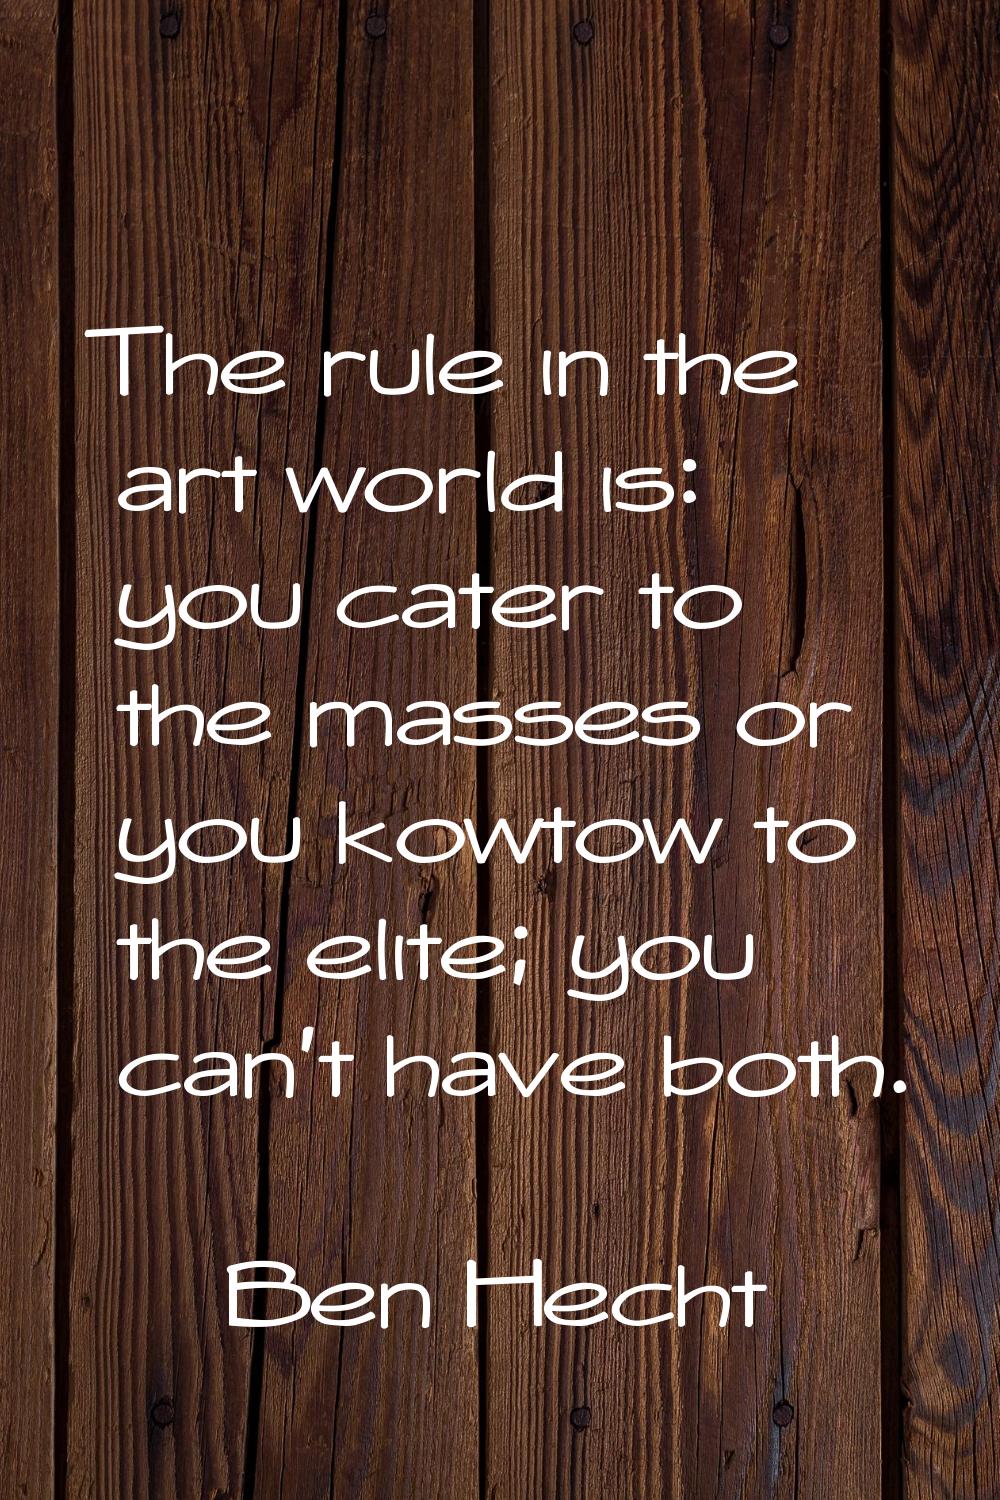 The rule in the art world is: you cater to the masses or you kowtow to the elite; you can't have bo